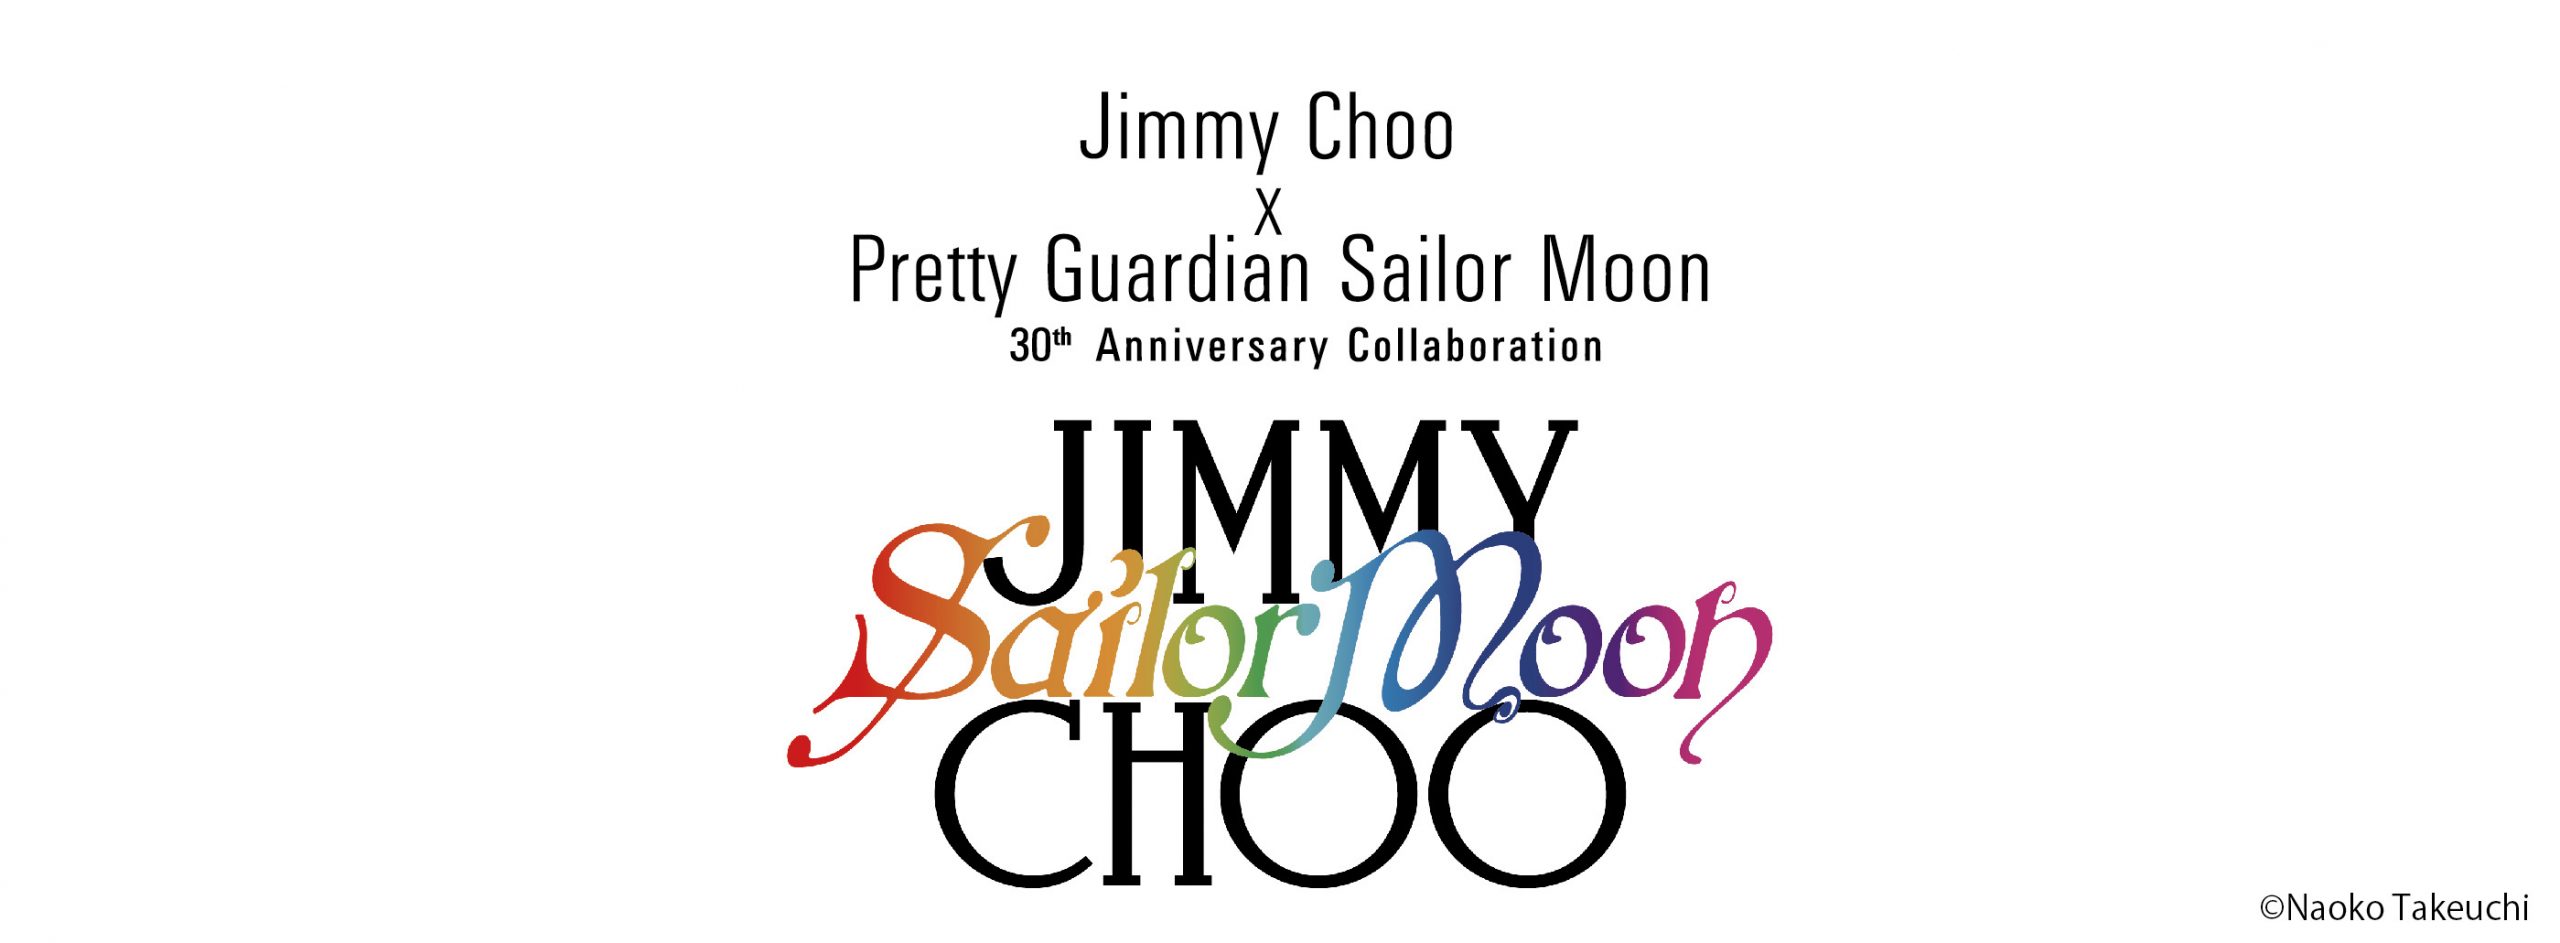 Jimmy Choo News and Features